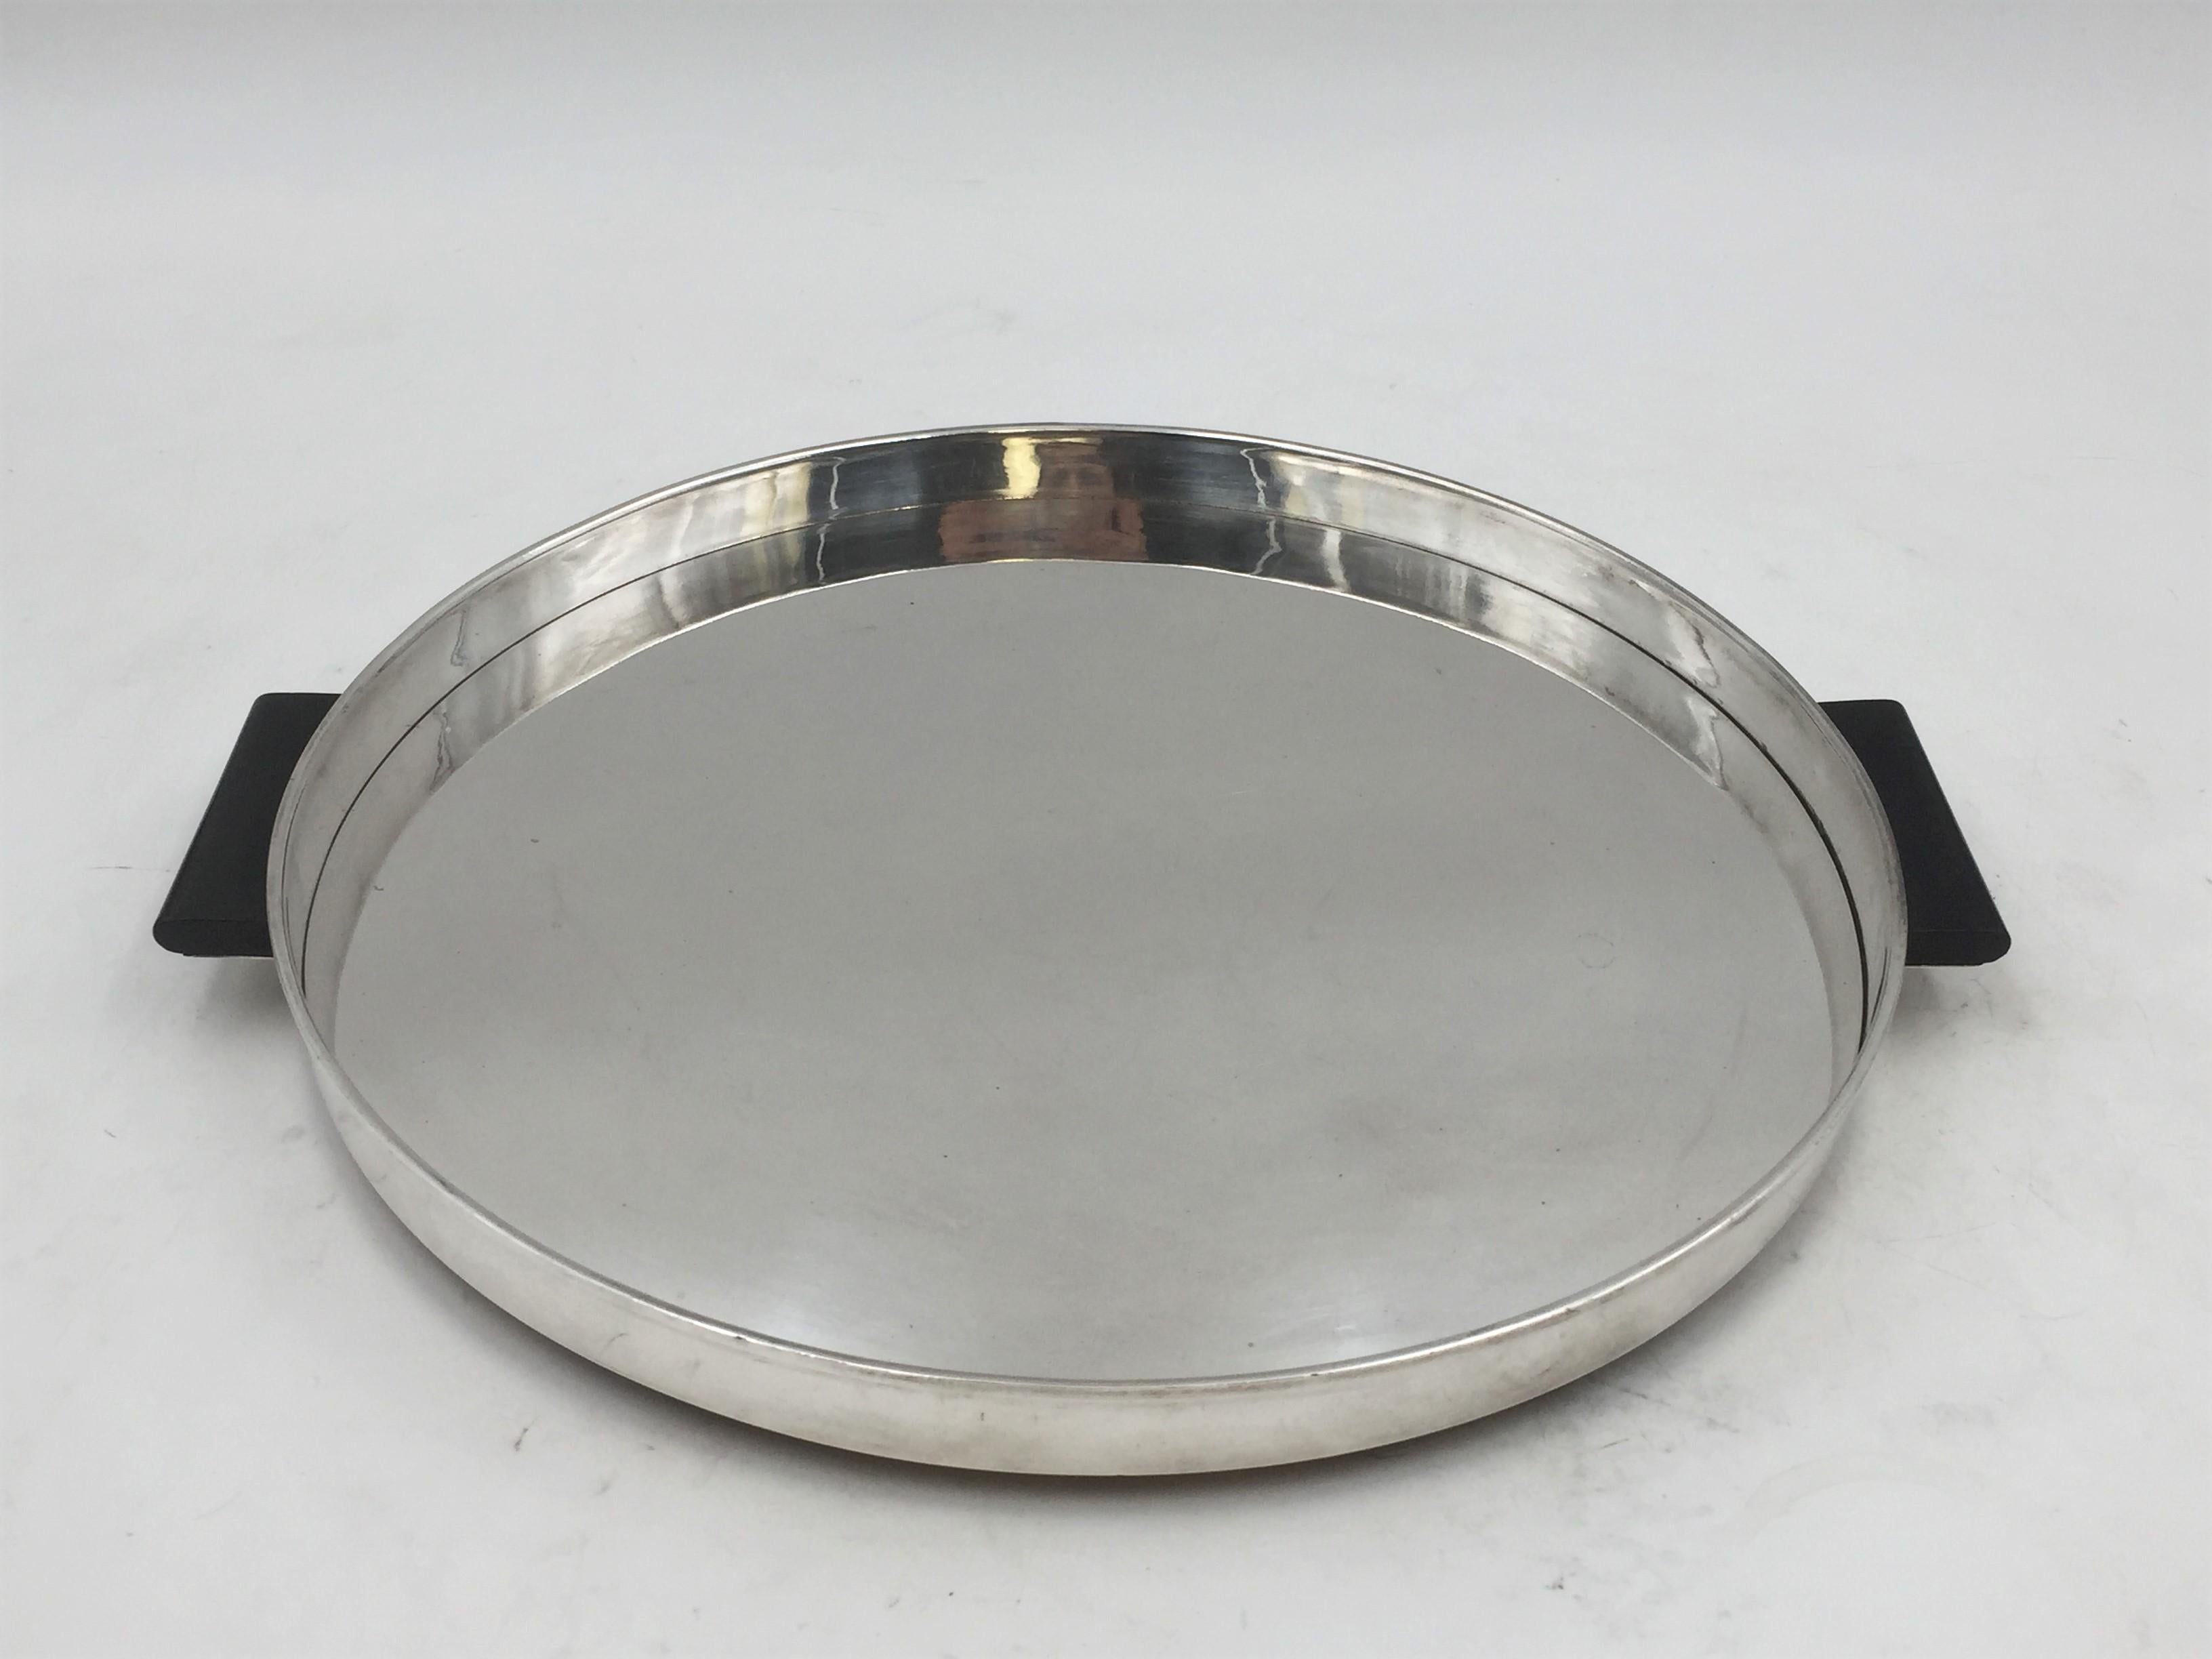 German, circular, sterling silver tray / platter standing on 4 feet with two dark wood handles whose elegant, geometrically-inspired lines are characteristic of the famed Art Deco and Bauhaus styles. It measures 11 1/4'' from handle to handle by